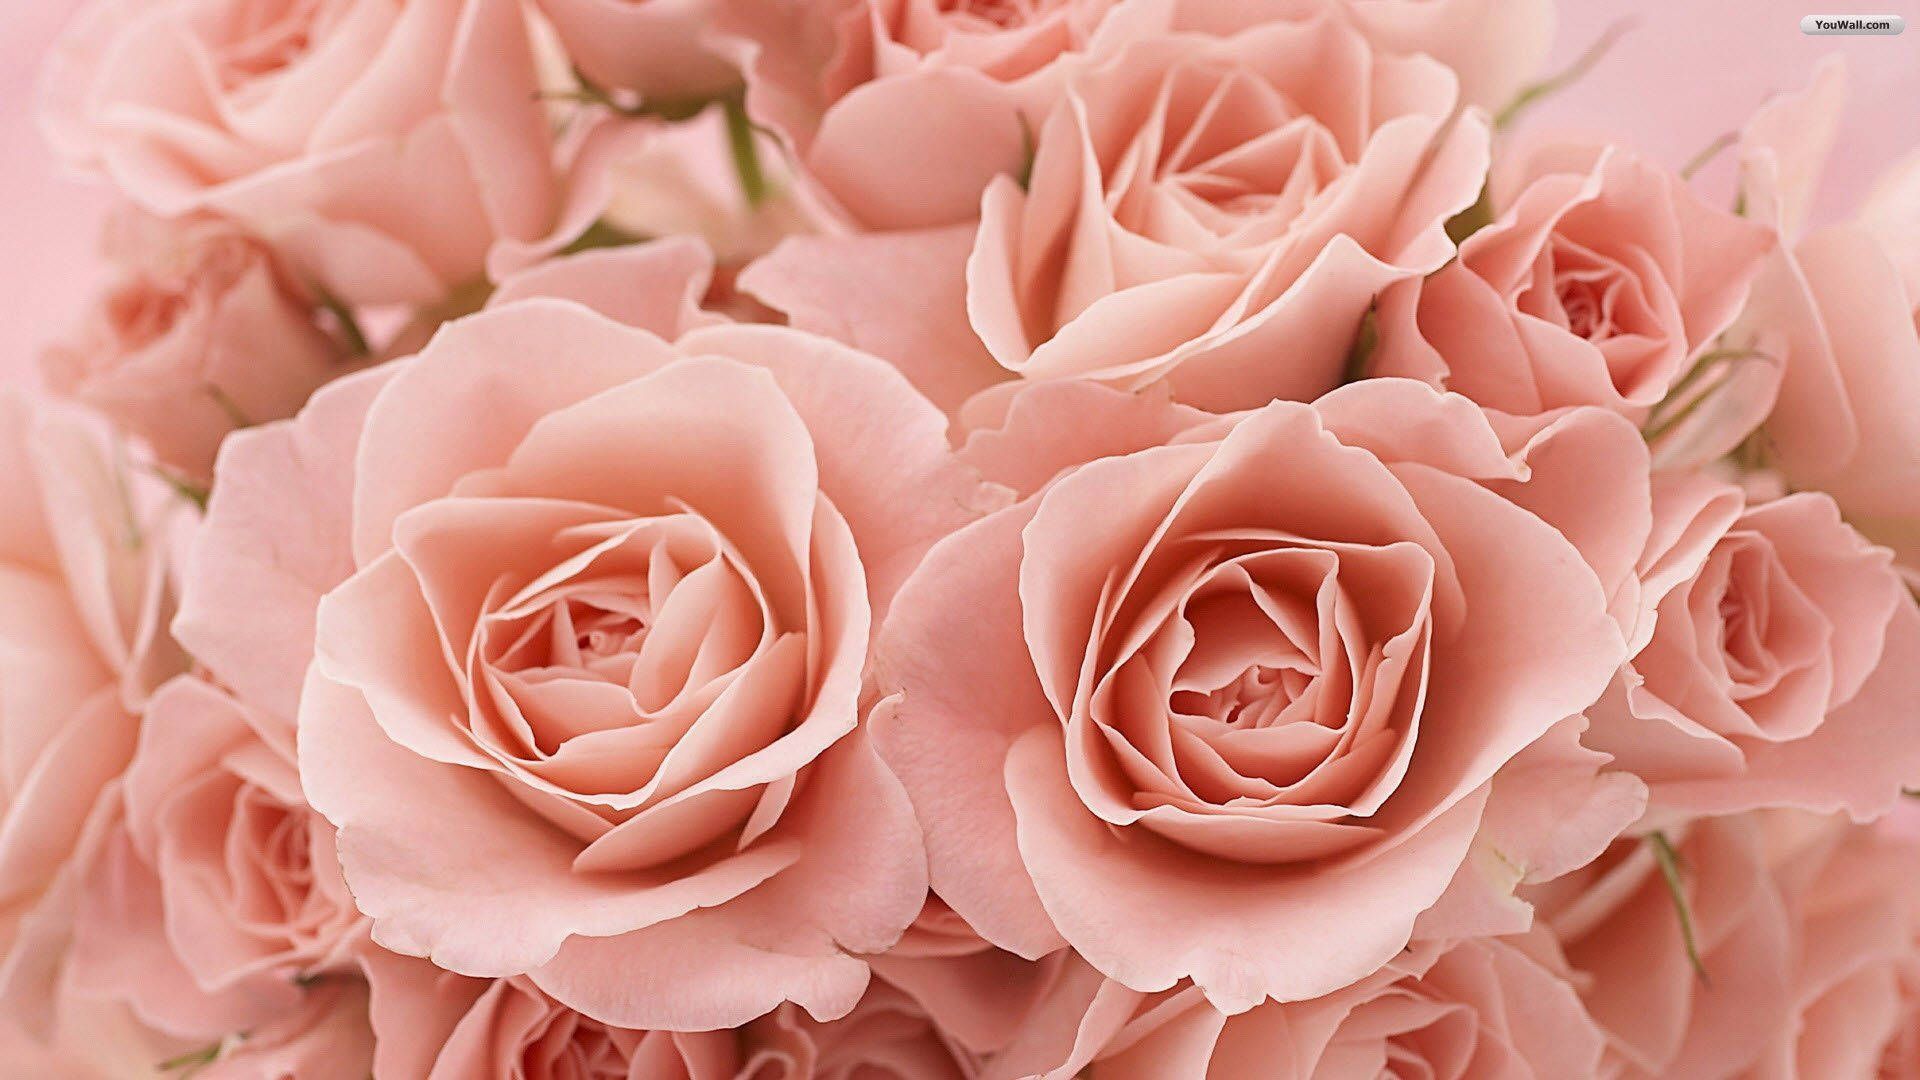 Download wallpapers 1920x1080 roses, flowers, bouquet, pink roses, buds, closeup, romantic, delicate, beautiful, background, wallpaper, screensaver, romantic mood, love, romance, for mobile and desktop backgrounds - Roses